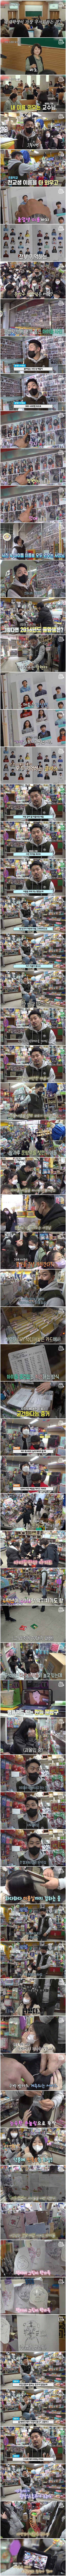 The stationery owner memorizes all the names of elementary school students.